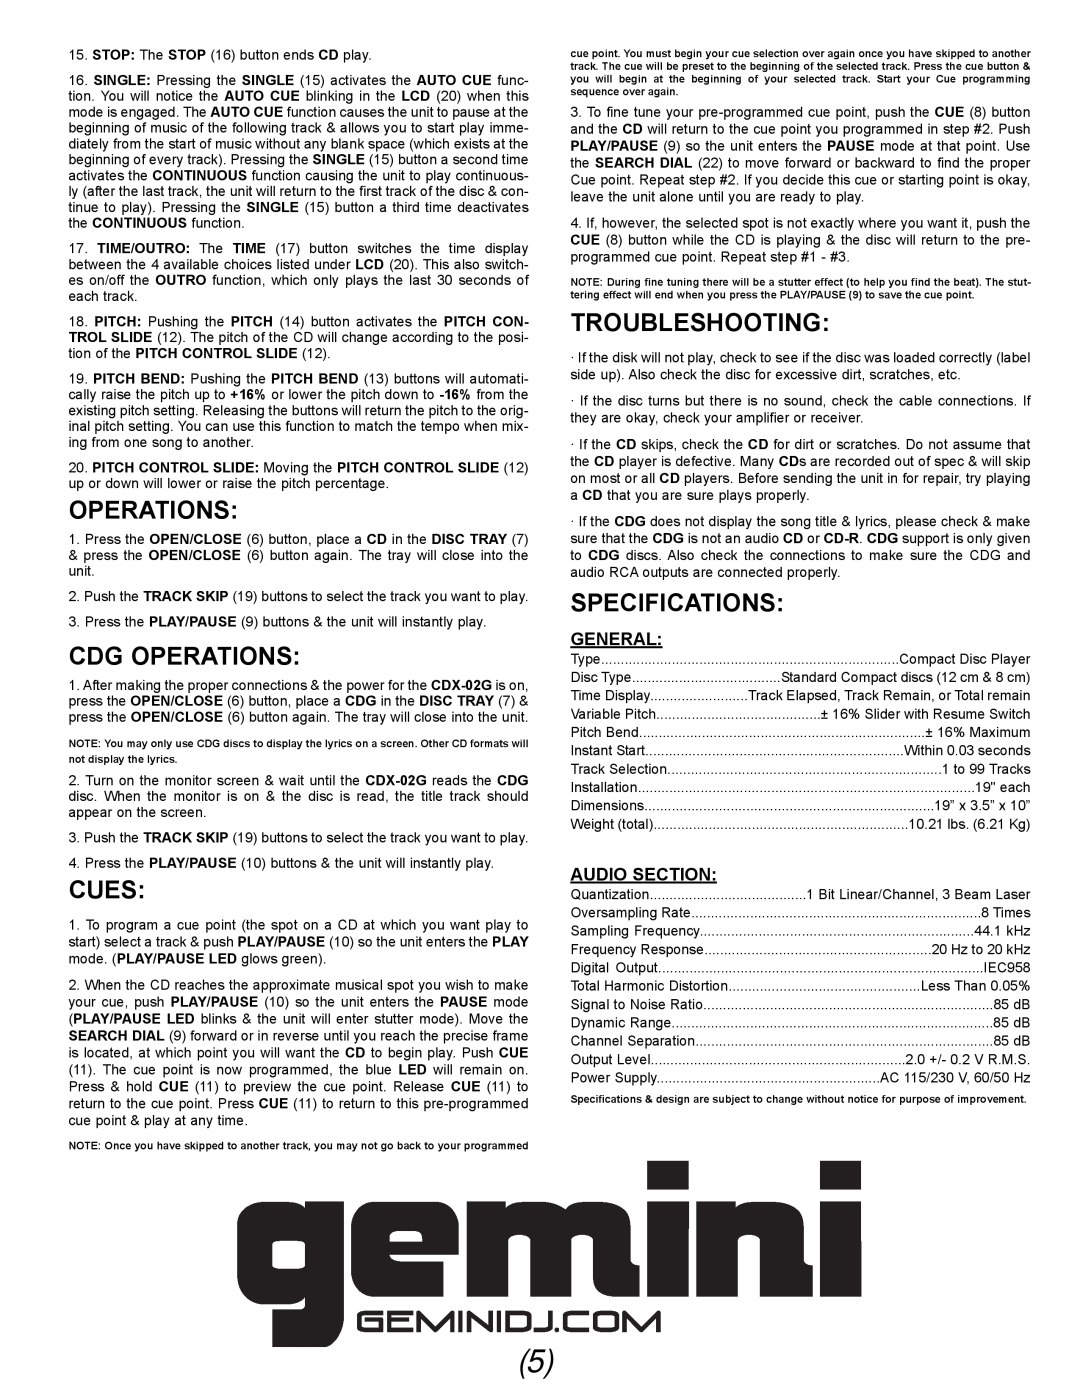 Gemini CDX-02G manual Cdg Operations, Cues, Troubleshooting, Specifications, General, Audio Section 